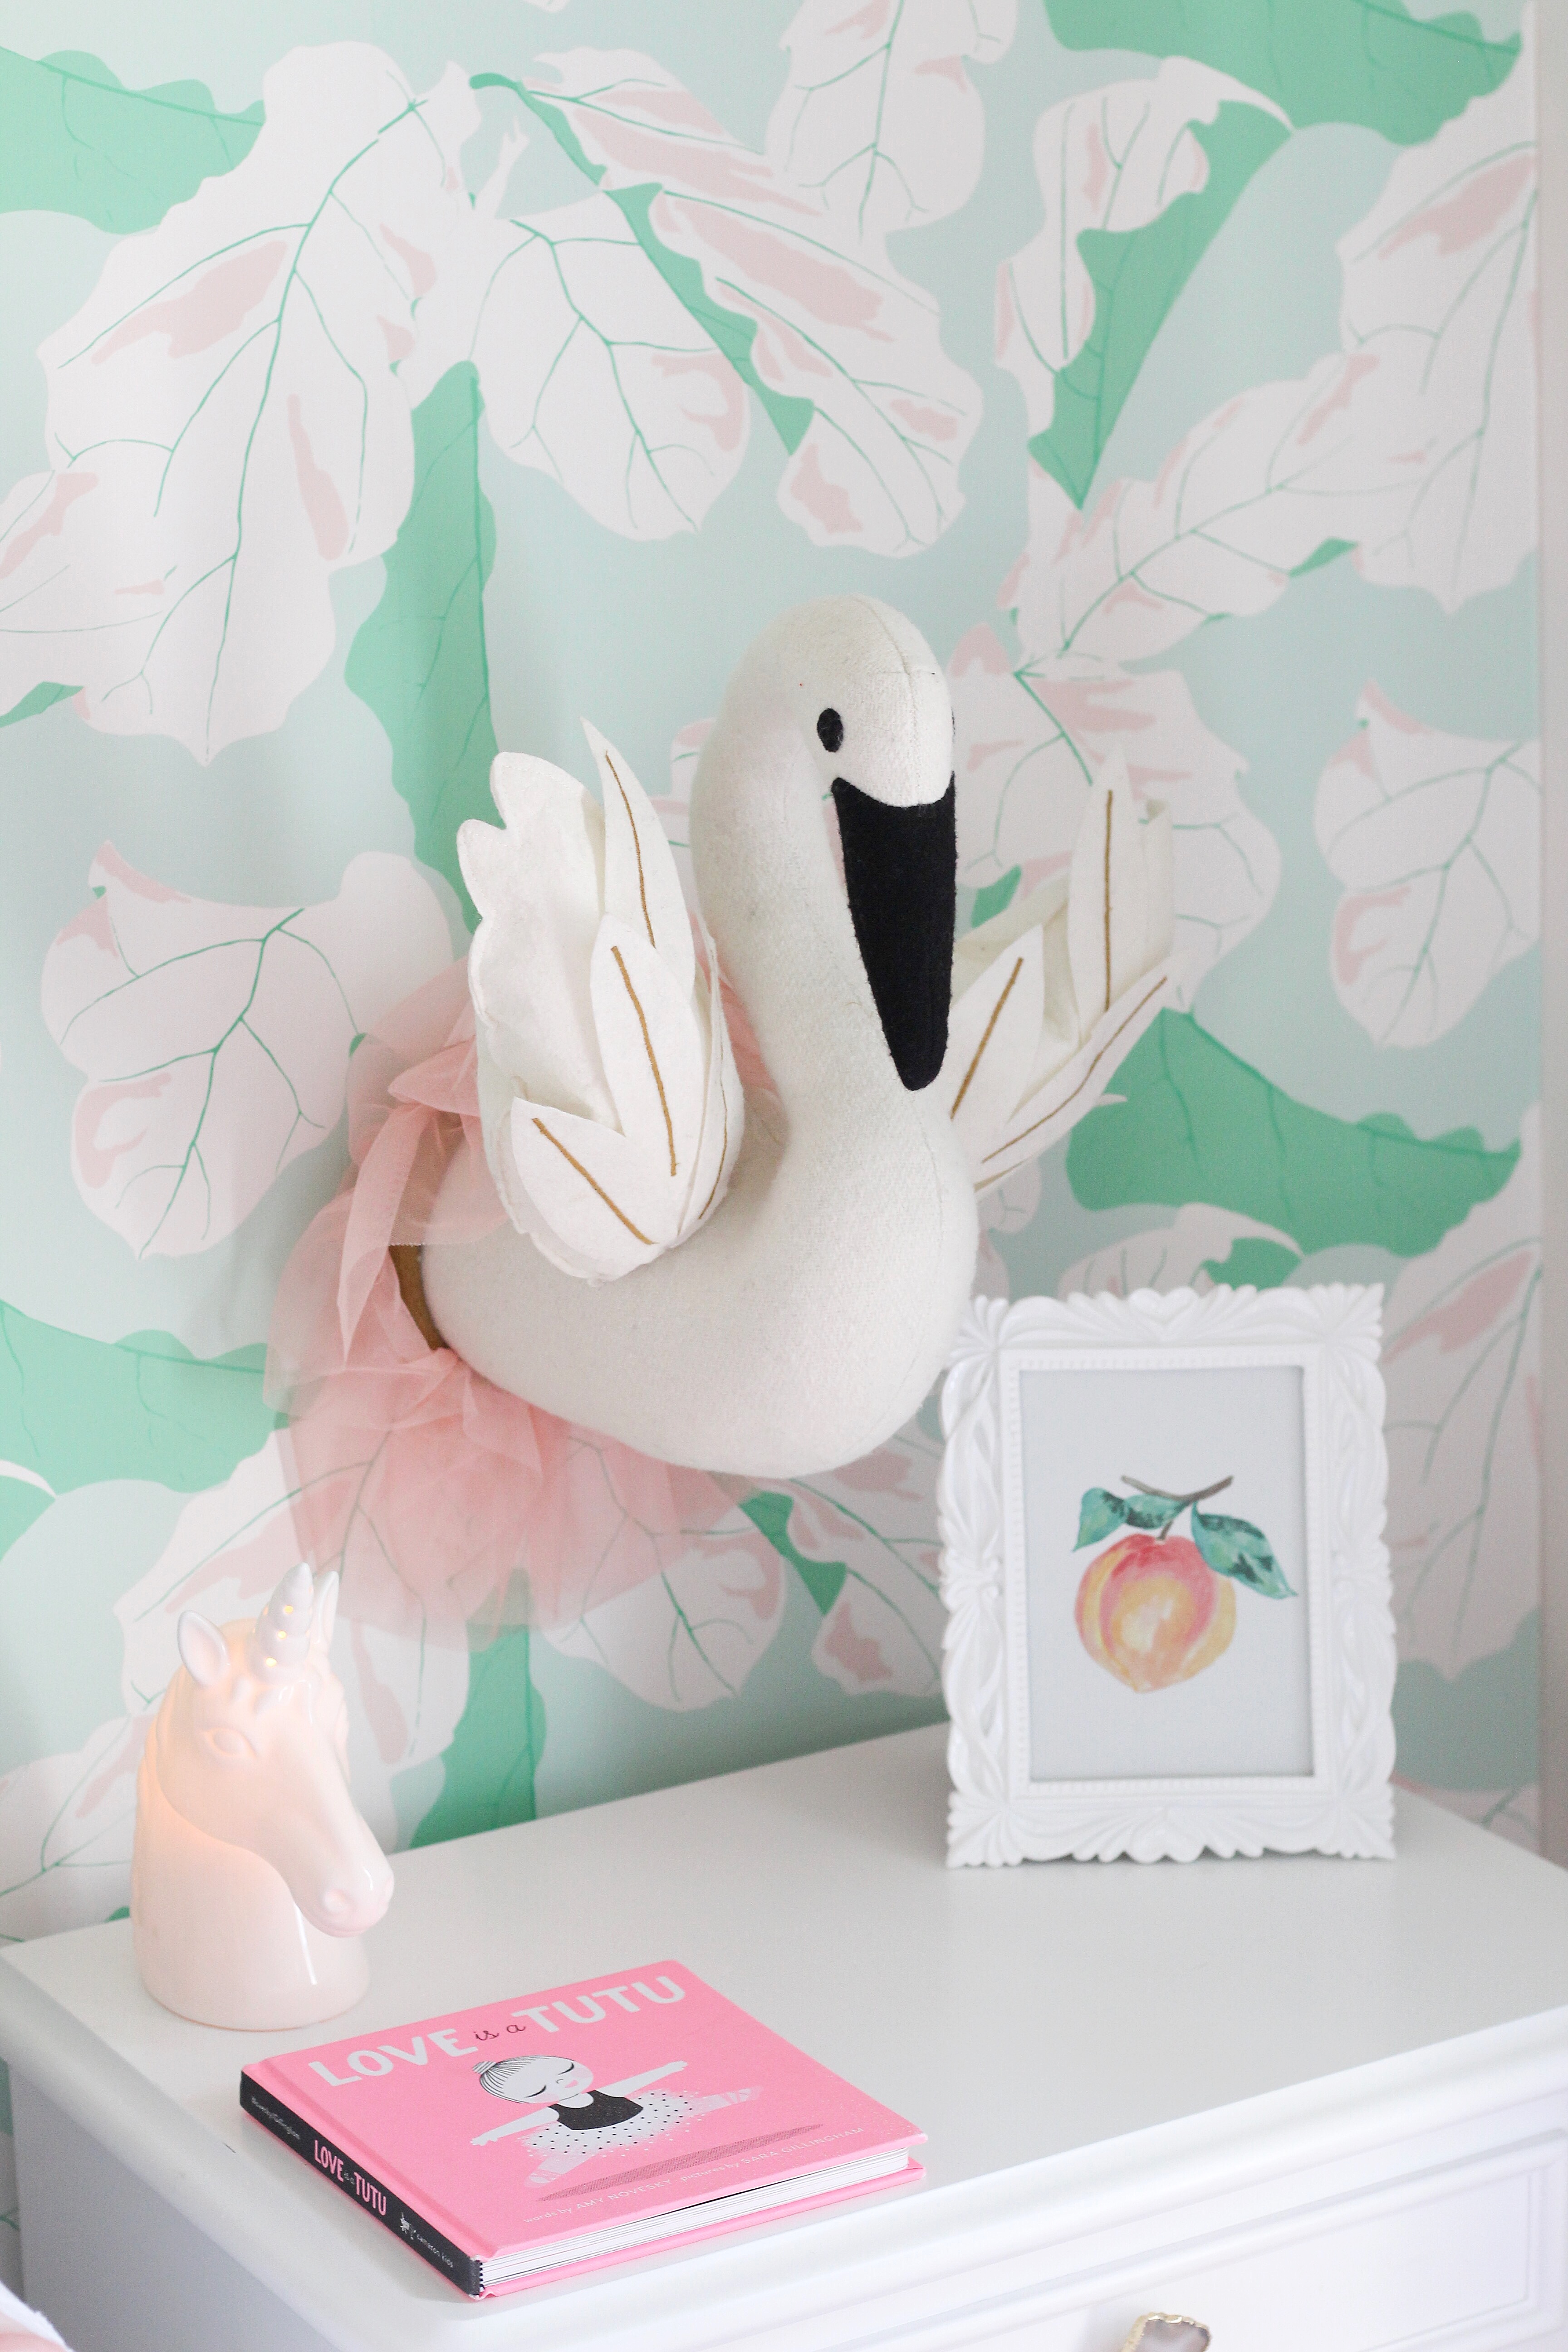 Toddler Room With Green And Pink Wallpaper - Swan - HD Wallpaper 